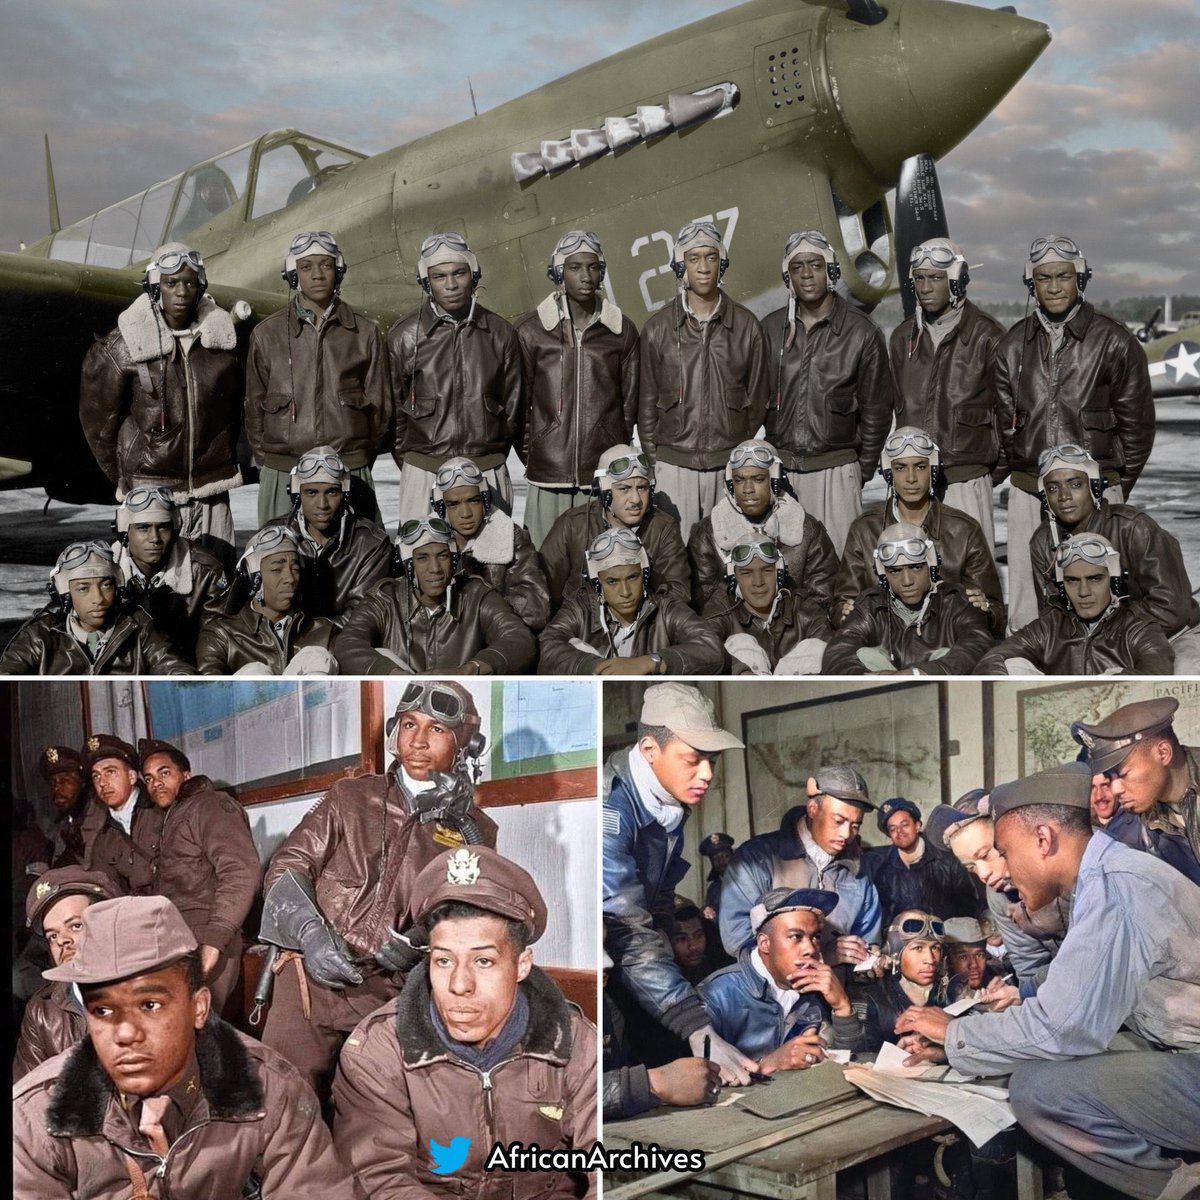 On this day in 1942, the Tuskegee Airmen became the first African American flying unit in the U.S. military and fought in World War II. The Tuskegee Airmen epitomized courage and heroism. The first unit, the 99th Pursuit Squadron, was activated at Chanute Field in Rantoul,…